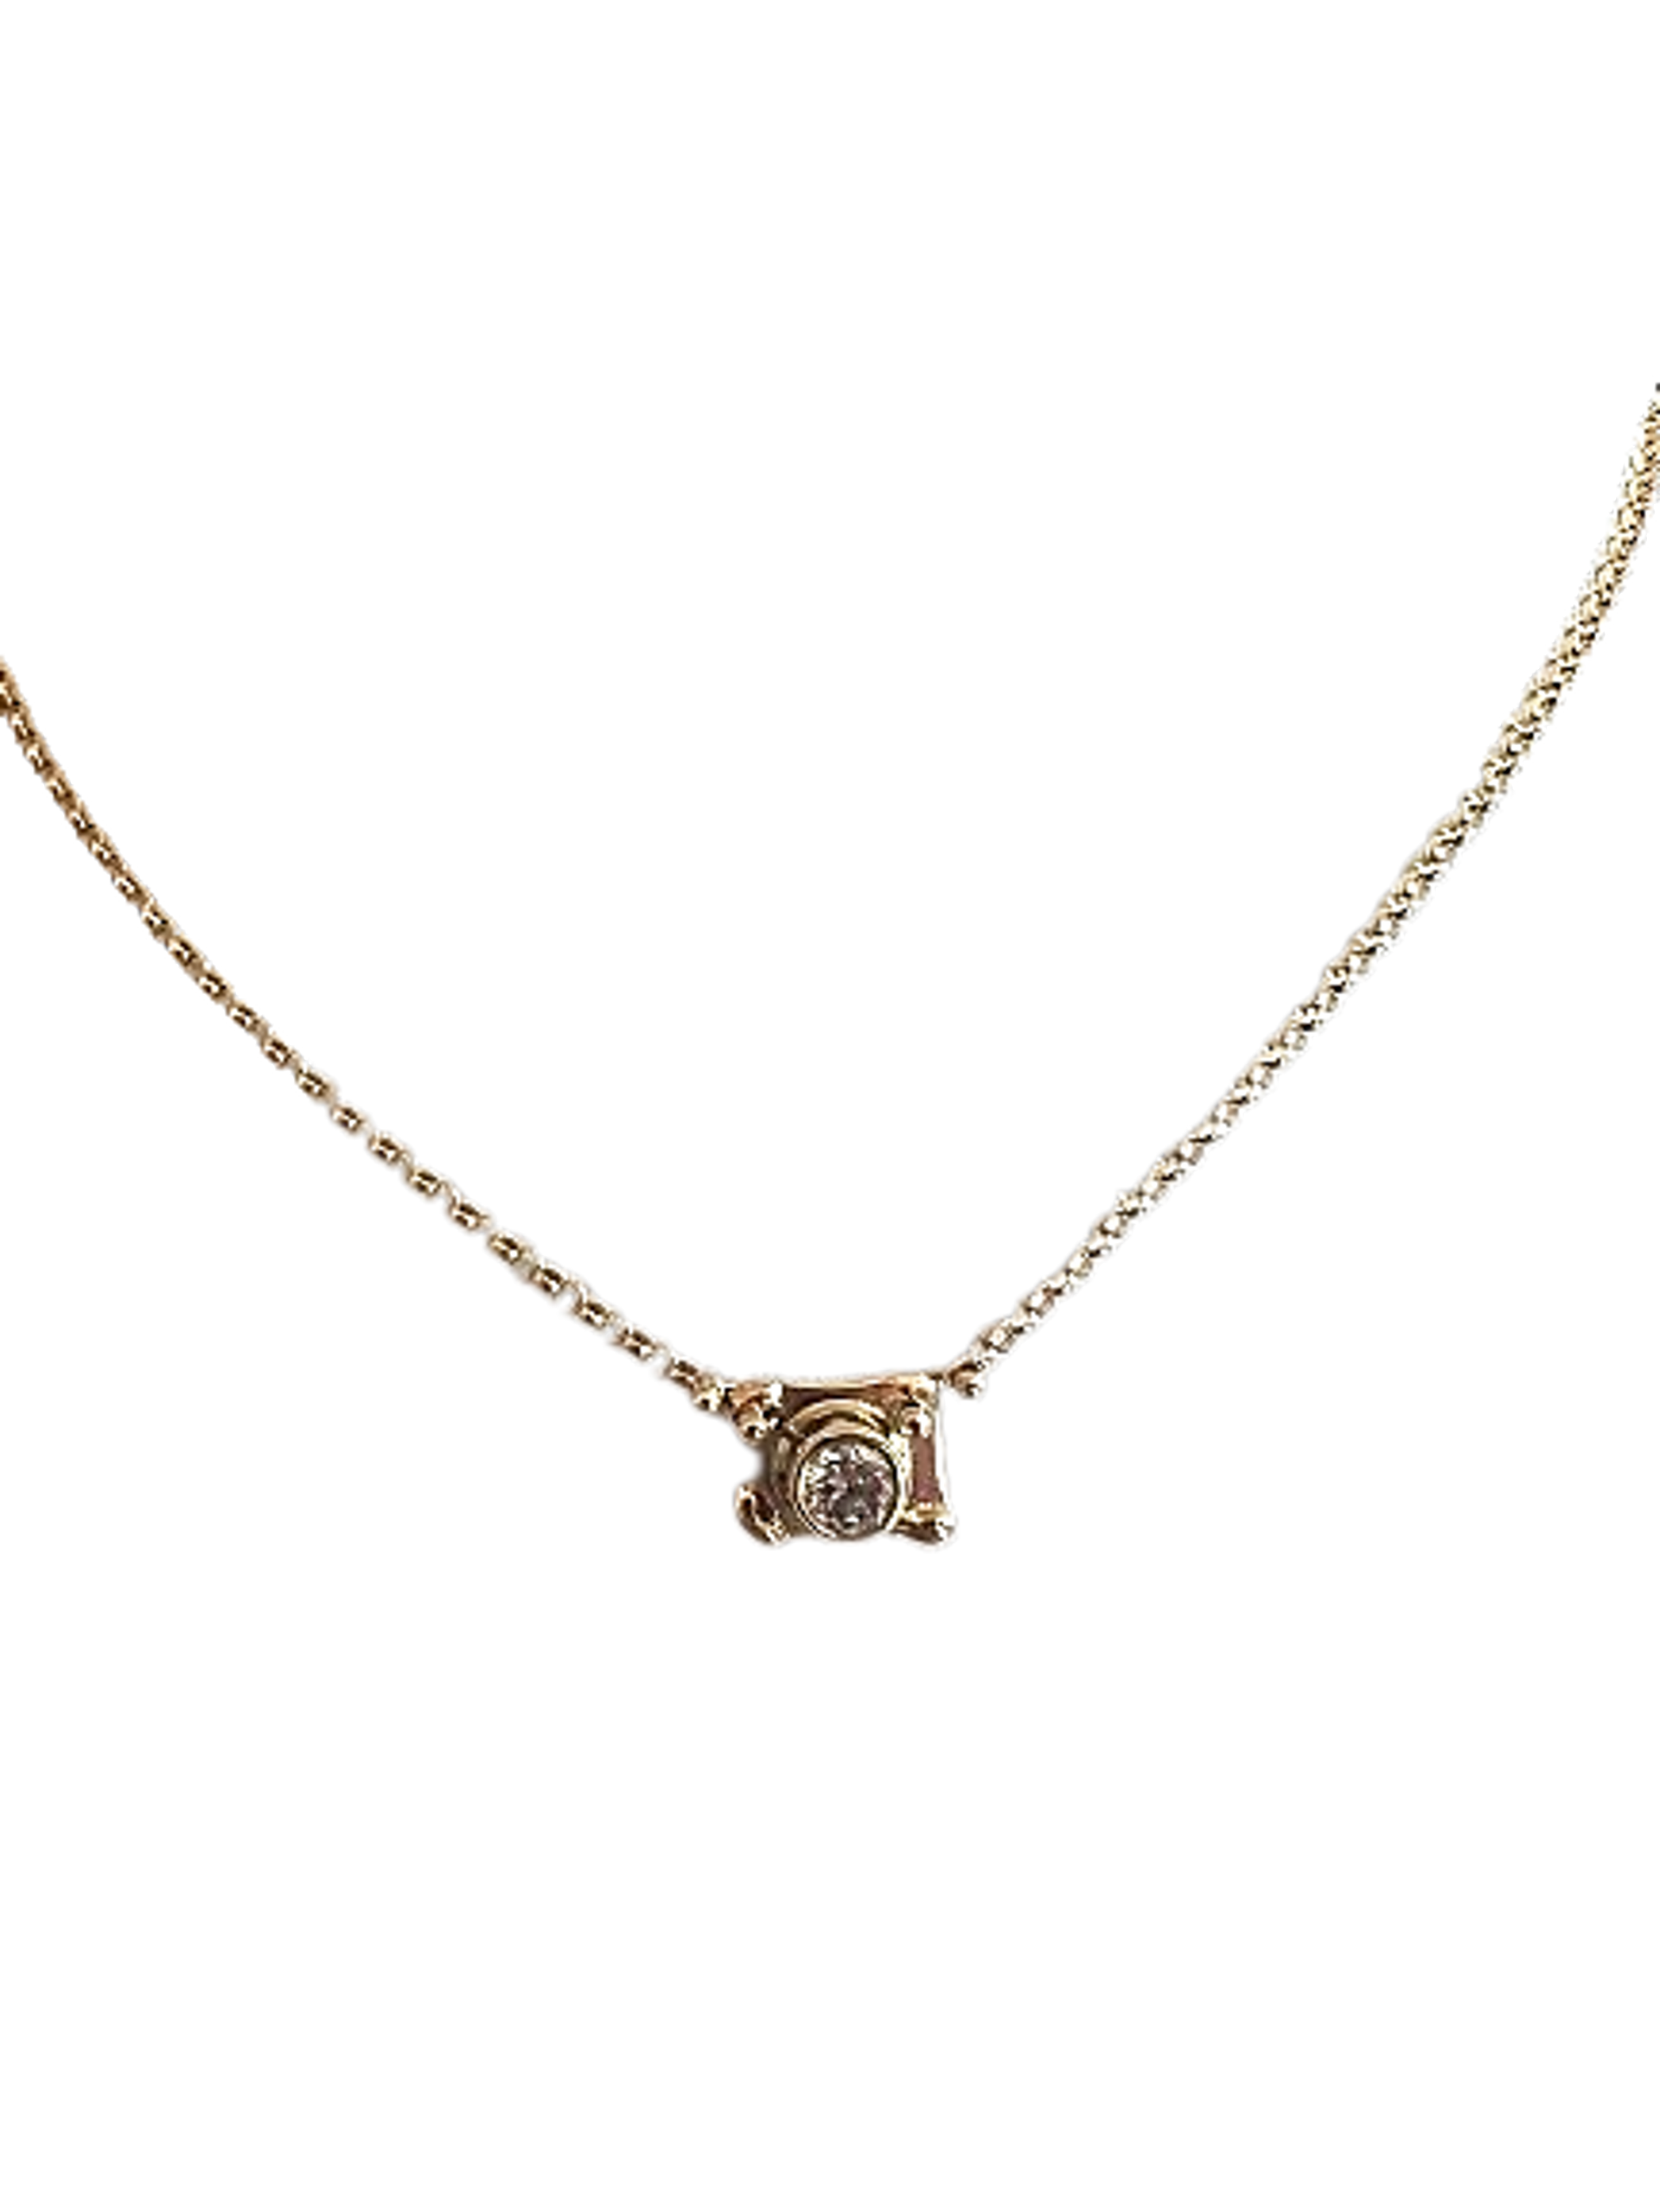 Solo Seashell Sparkle Necklace - 14k Gold & .25ct Lab-Grown Diamond by Kristen Baird